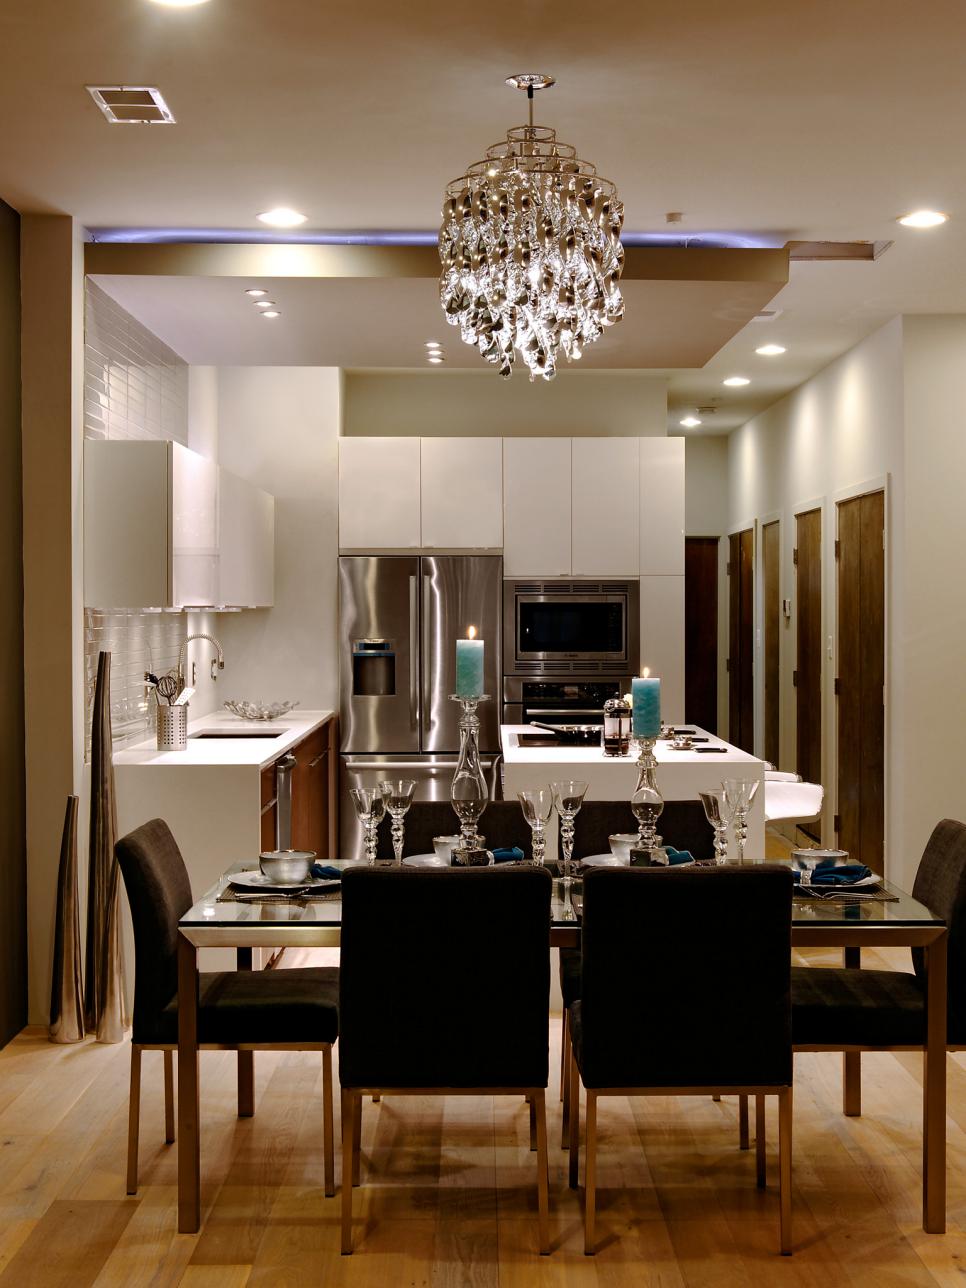 Glam Dining Room With White Modern Kitchen